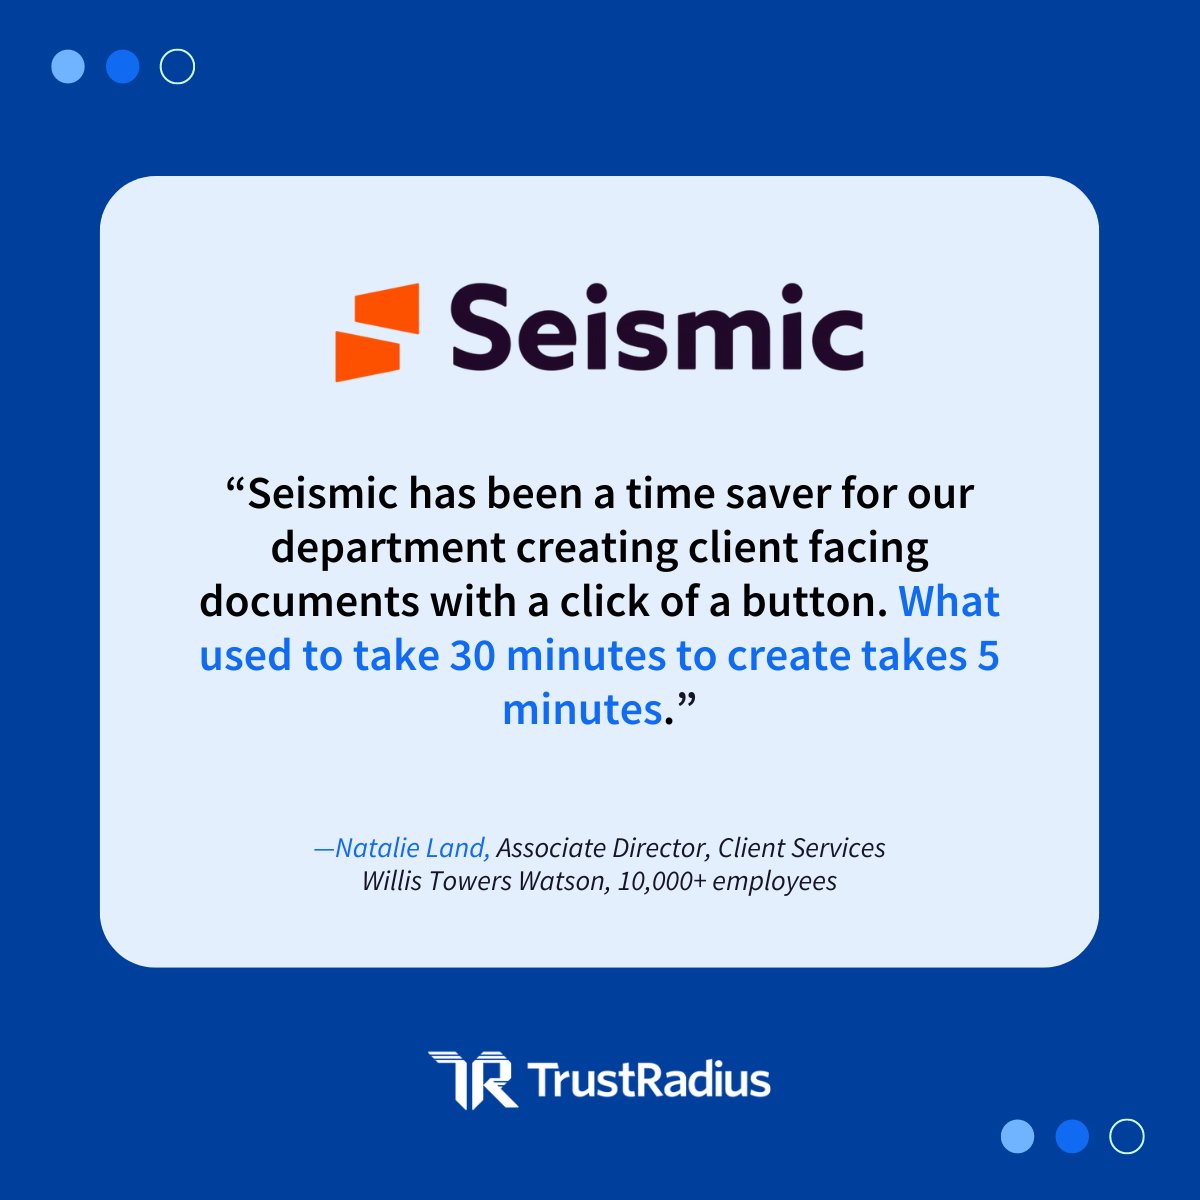 📣 #ShoutOutSunday to @SeismicSoftware!

This #SalesEnablement platform serves as a #SalesContent and #ContentManagement tool that provides easy access to relevant materials. 

🤩 Check out their product profile page to see what real users are saying: bit.ly/440uiIK